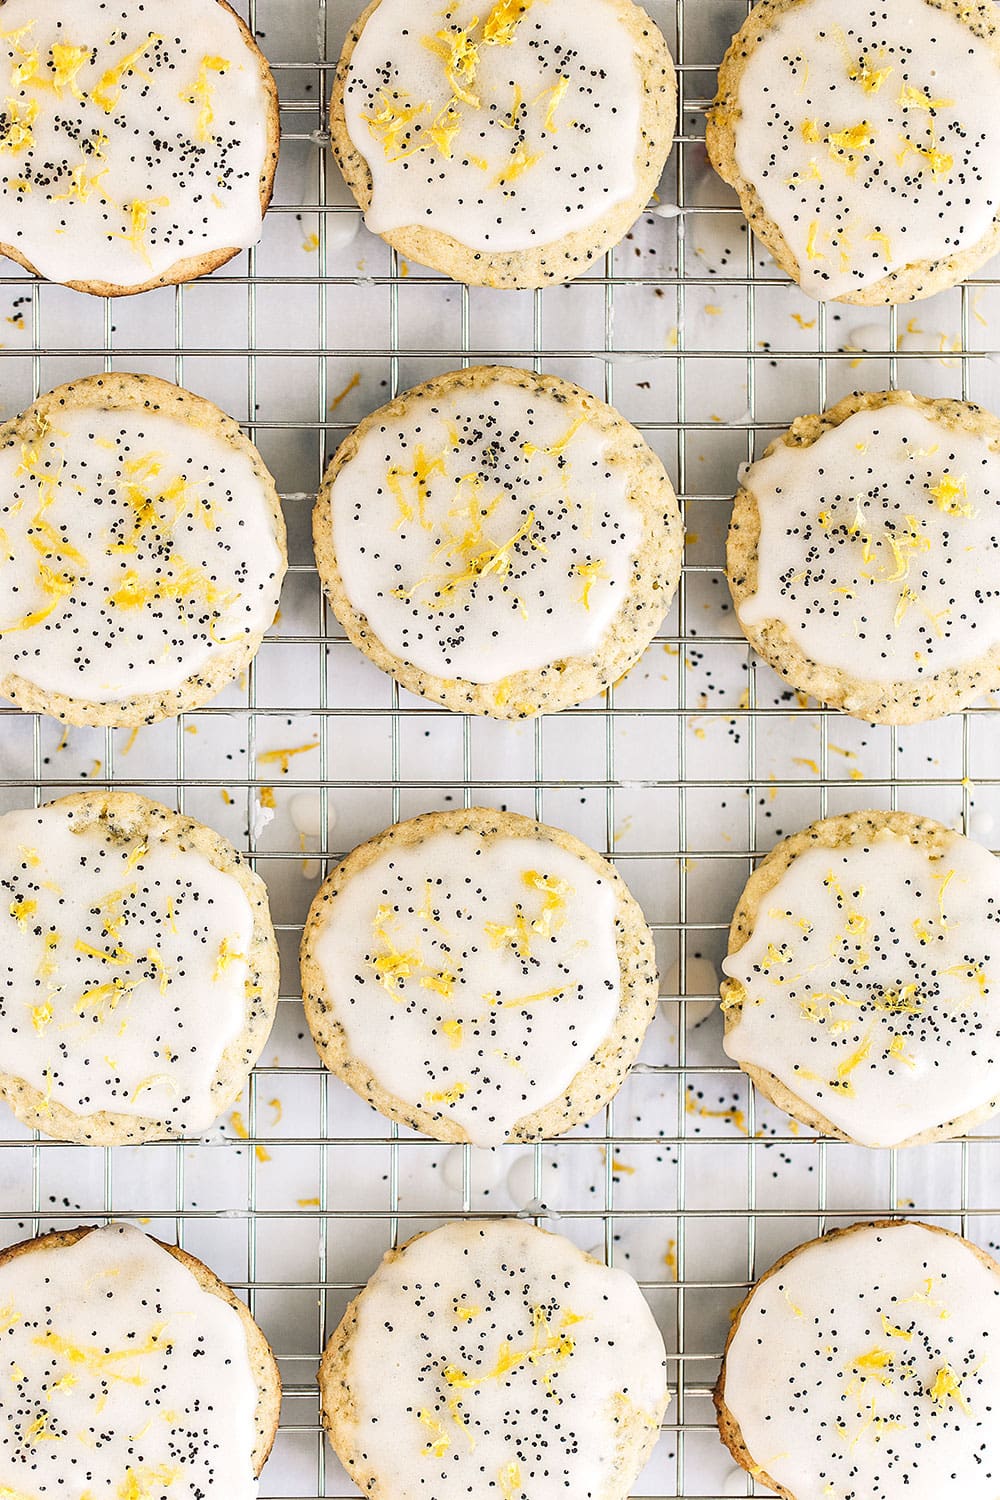 Beautifully bright and refreshing, these Soft Batch Lemon Poppy Seed Cookies are crazy tender and loaded with fresh lemon flavor. Perfect summer cookie!